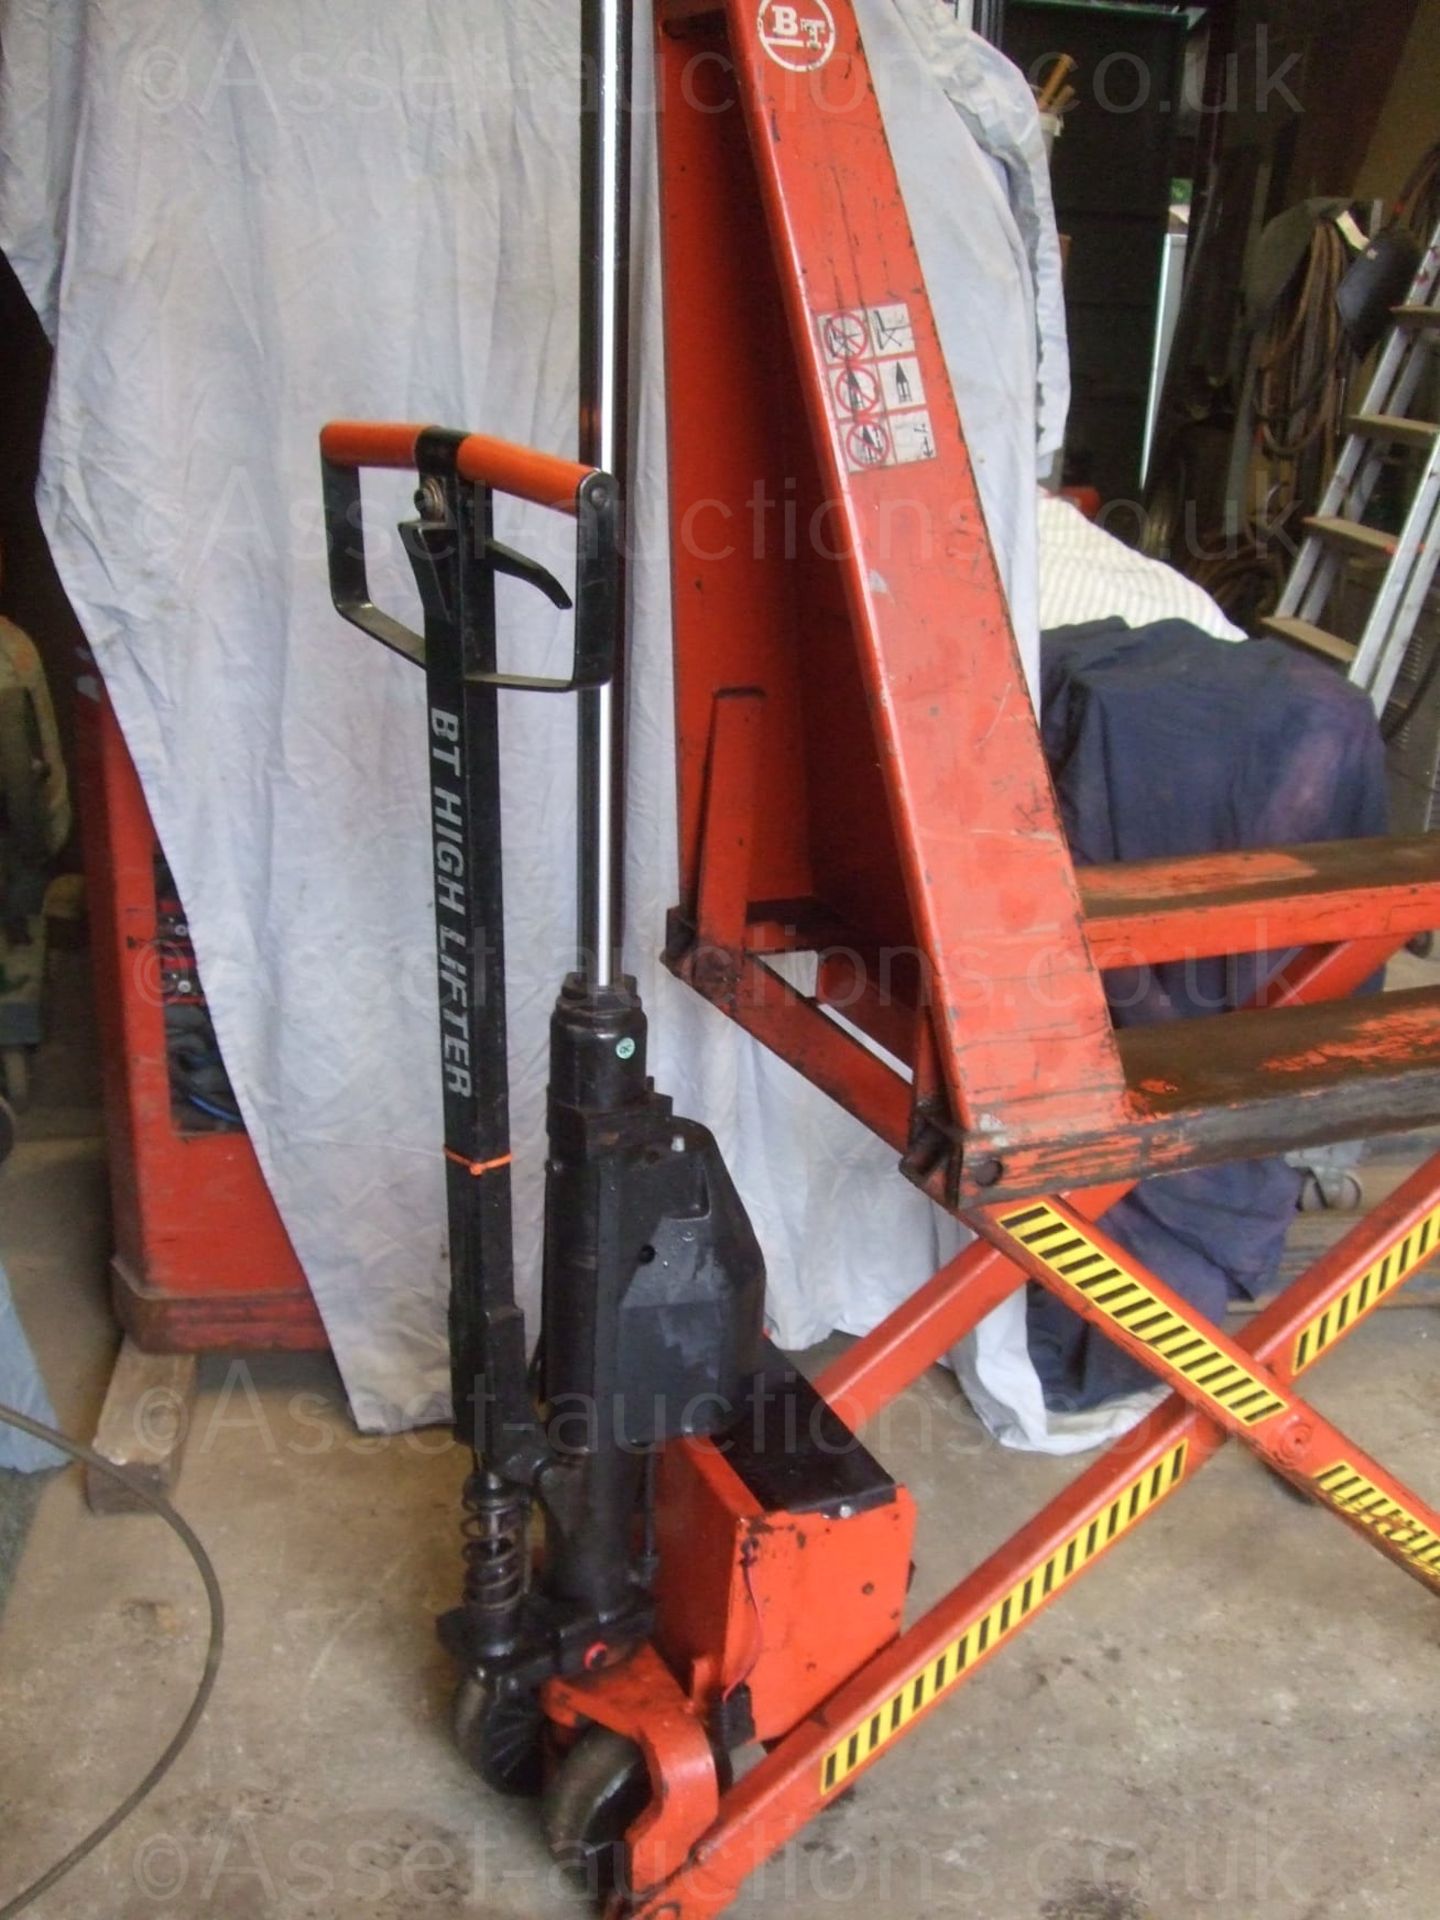 BT HIGHLIFTER HLE 10/3 HIGH LIFT PALLET TRUCK, PUSH / PULL PALLET TRUCK WITH ELECTRIC LIFT *PLUS VAT - Image 3 of 5